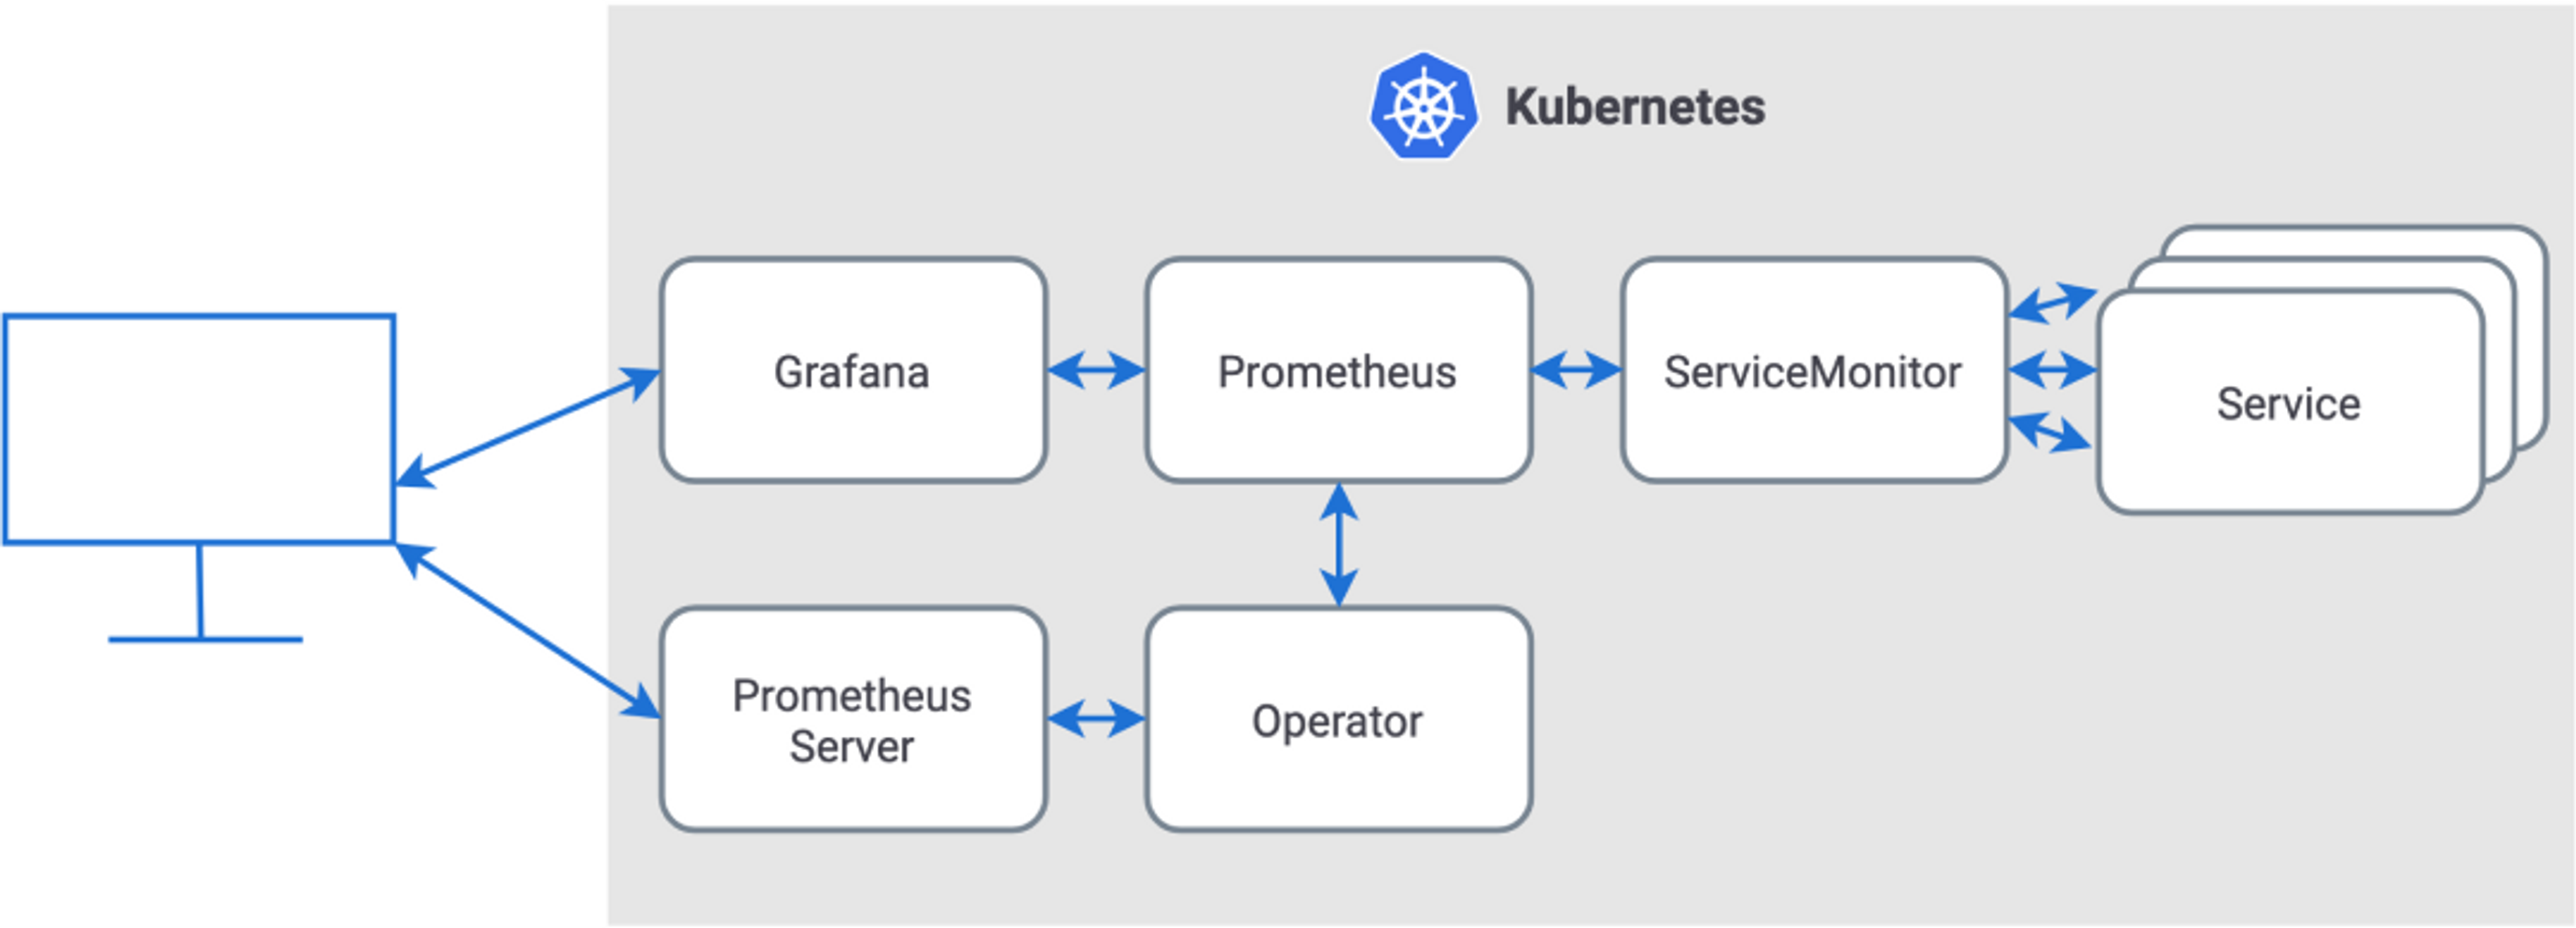 How Does Prometheus And Grafana Fit Into A Kubernetes Architecture?